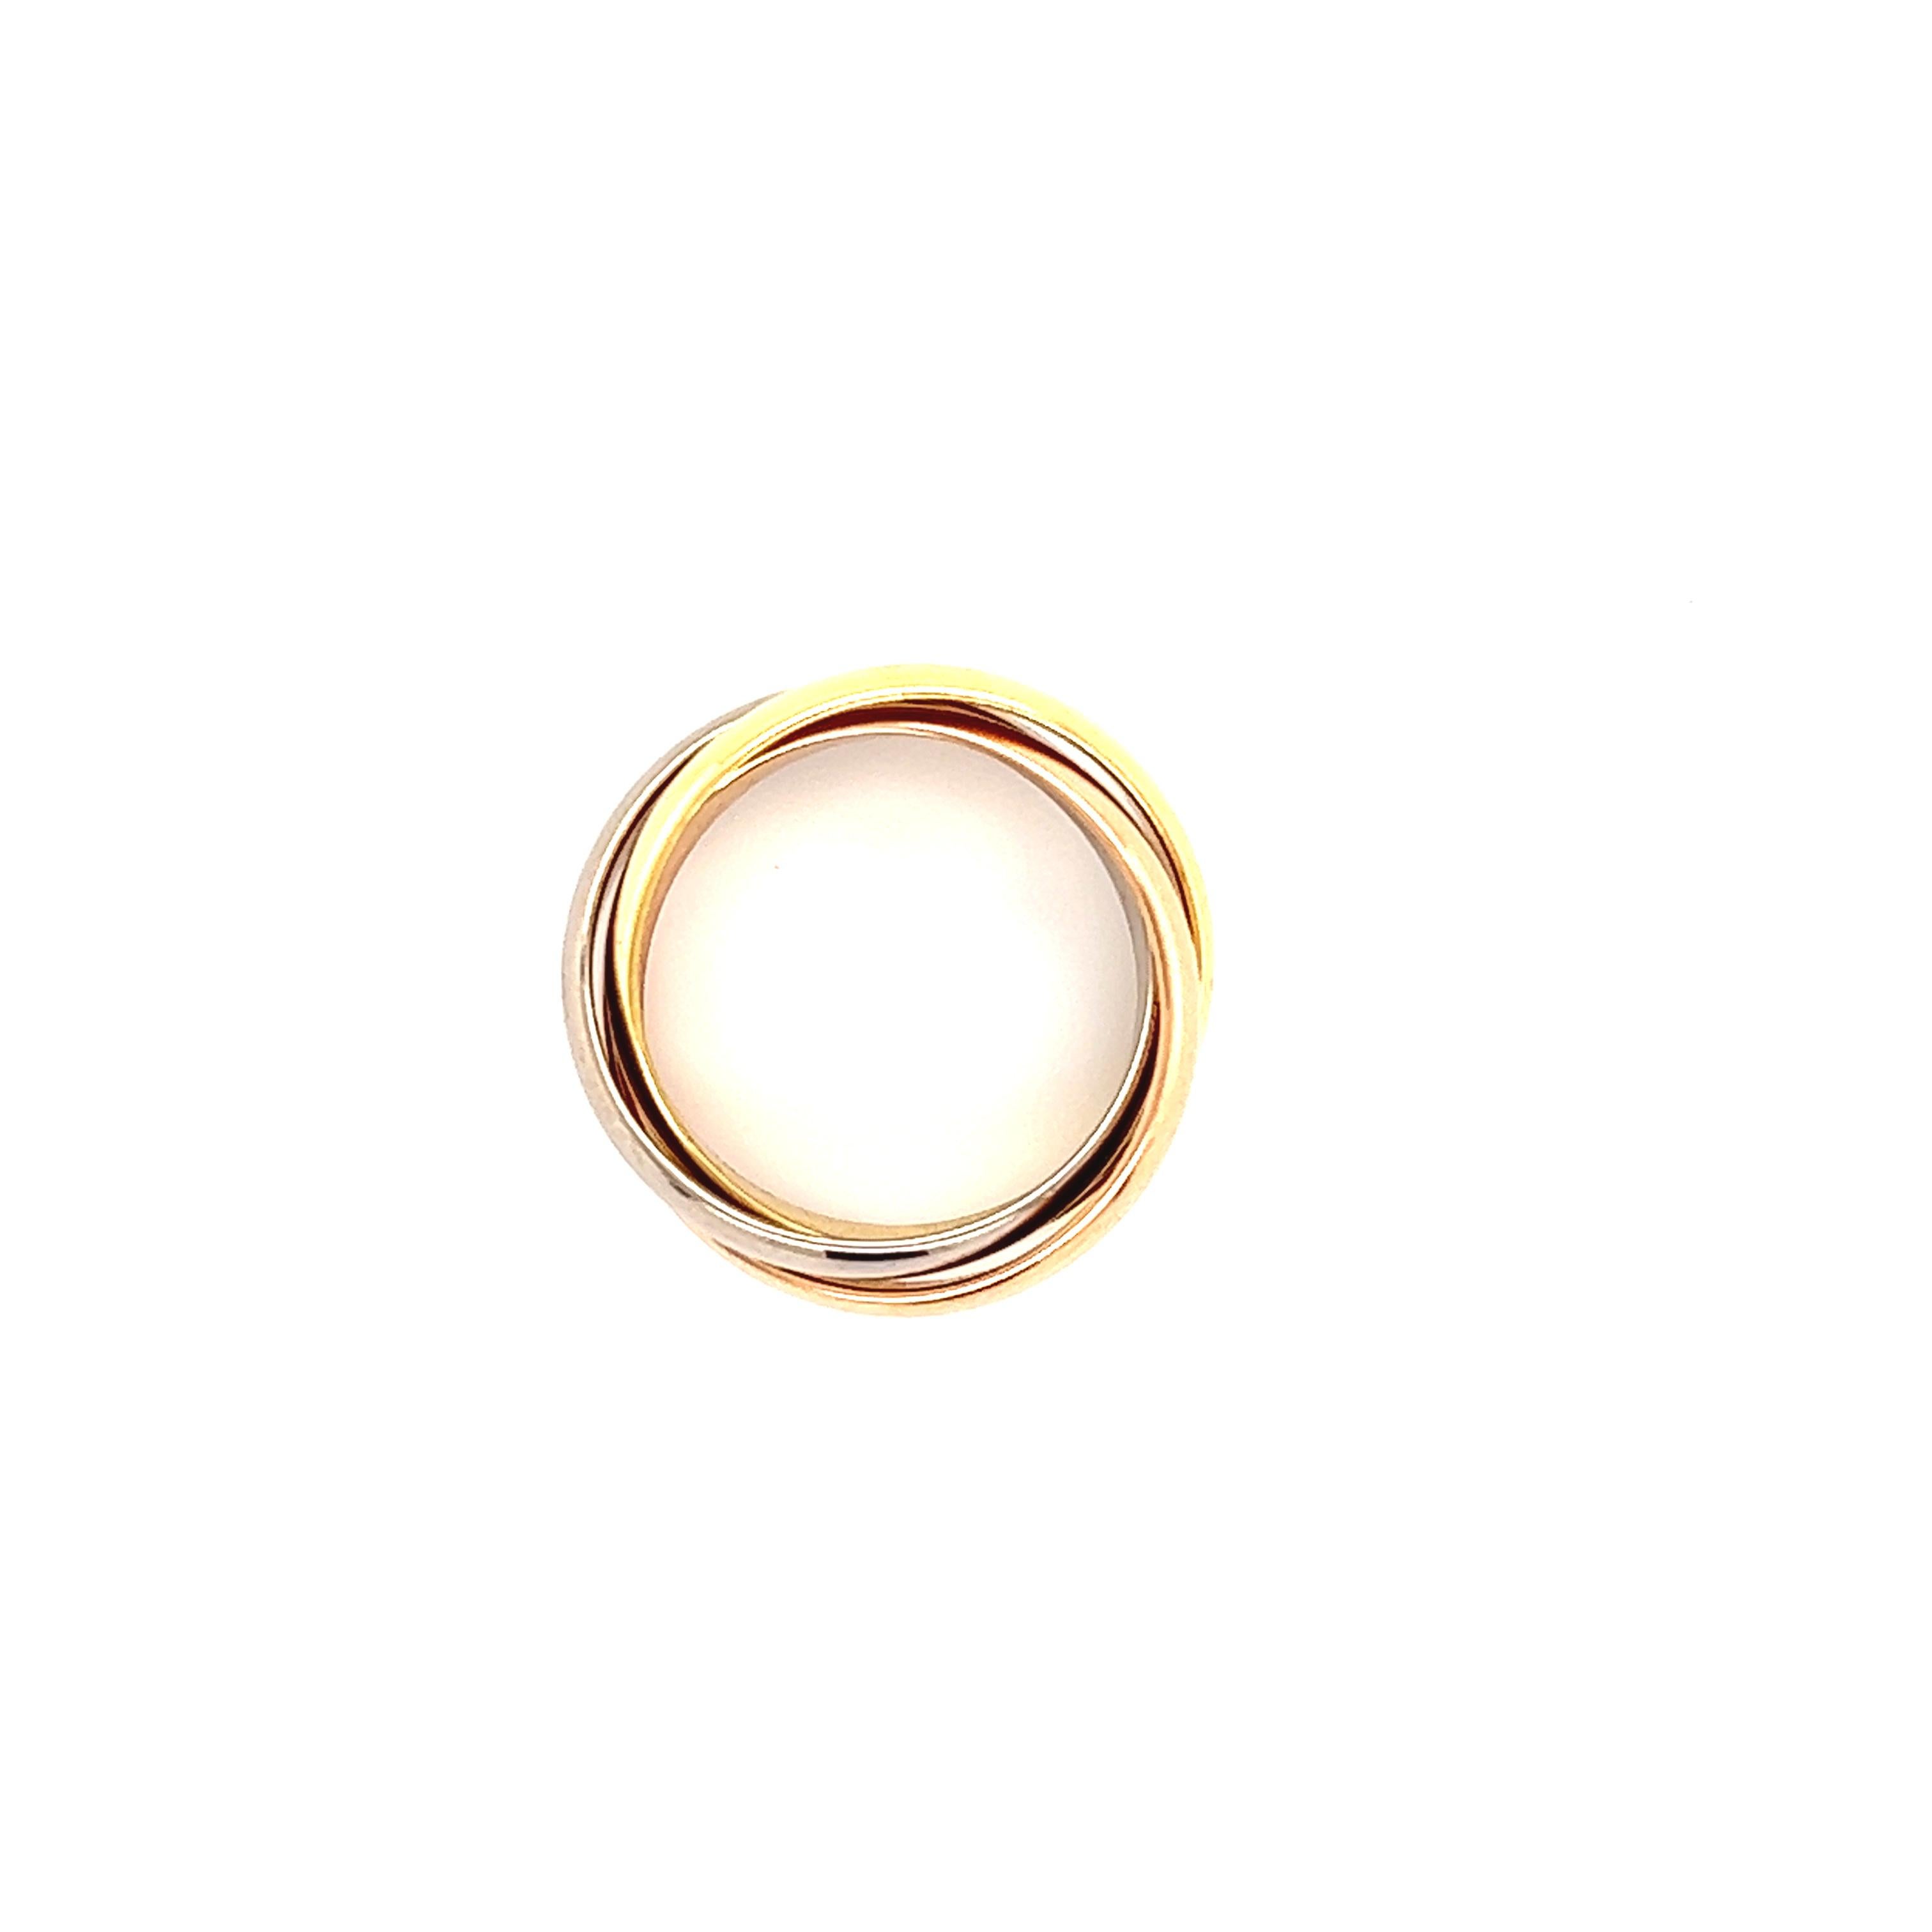 Beautiful ring from famed designer Cartier. The ring is from the Trinity collection and is the classic or medium size.  The ring is a size 51 or US size 5.75. The ring consists of three bands that are connected to  form this beautiful overlapping